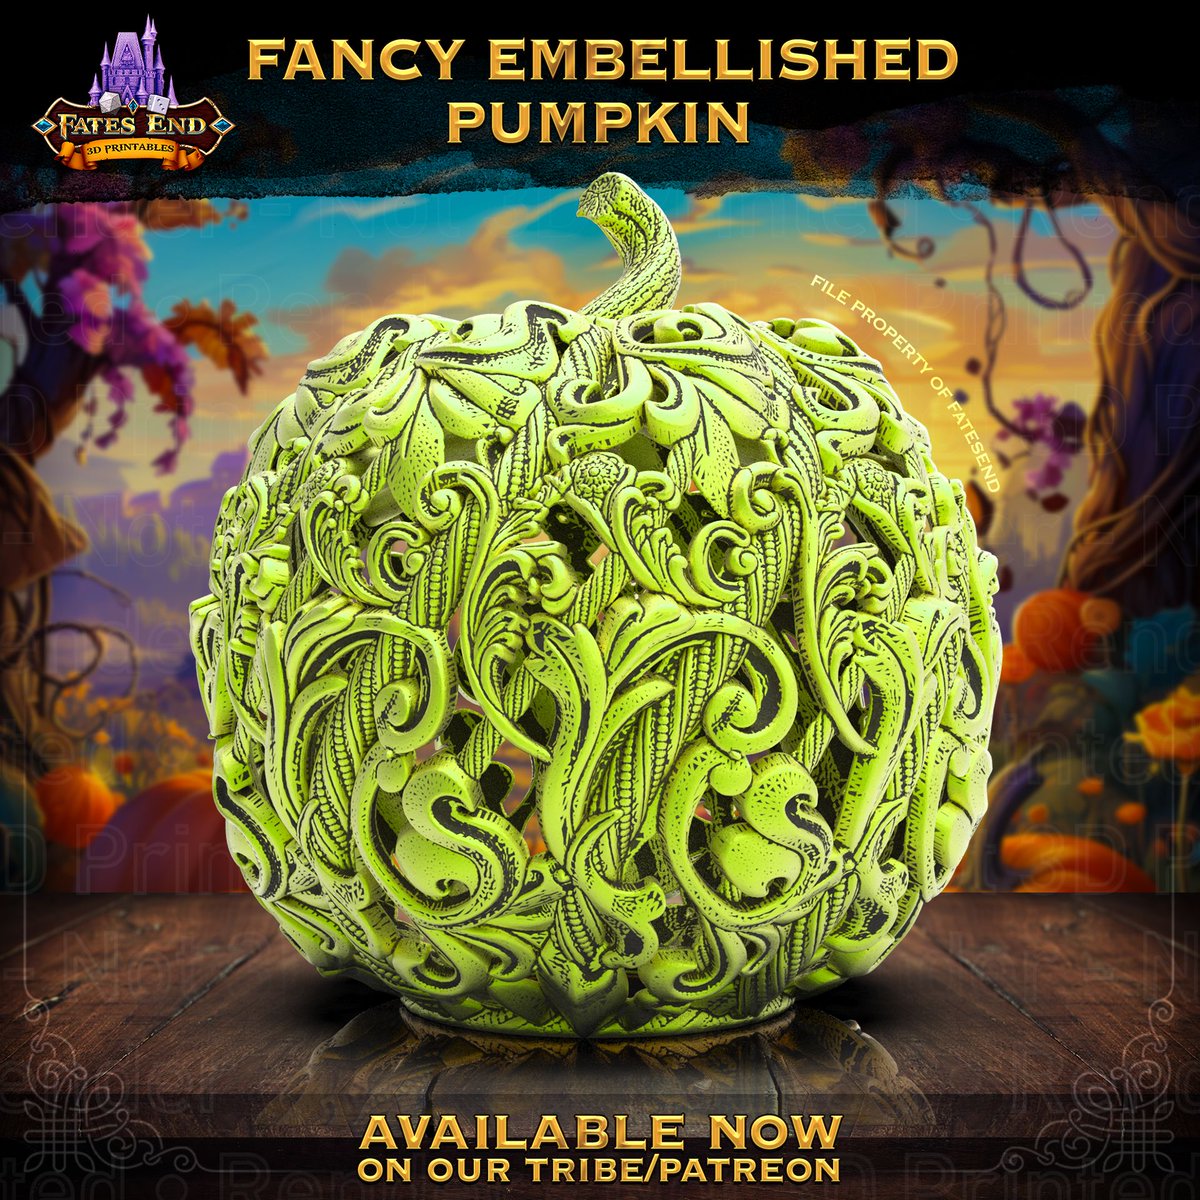 Dive into the tale of our Fancy Embellished Pumpkin—3D-printable elegance for your seasonal setup. Let this enchanted design lift your holiday spirit. 🎃✨
🔗Discover more, link in our bio! 
#Pumpkin #FatesEnd #DIYCrafts #SeasonalDecor #HolidayMagic #3DPrinting #3D